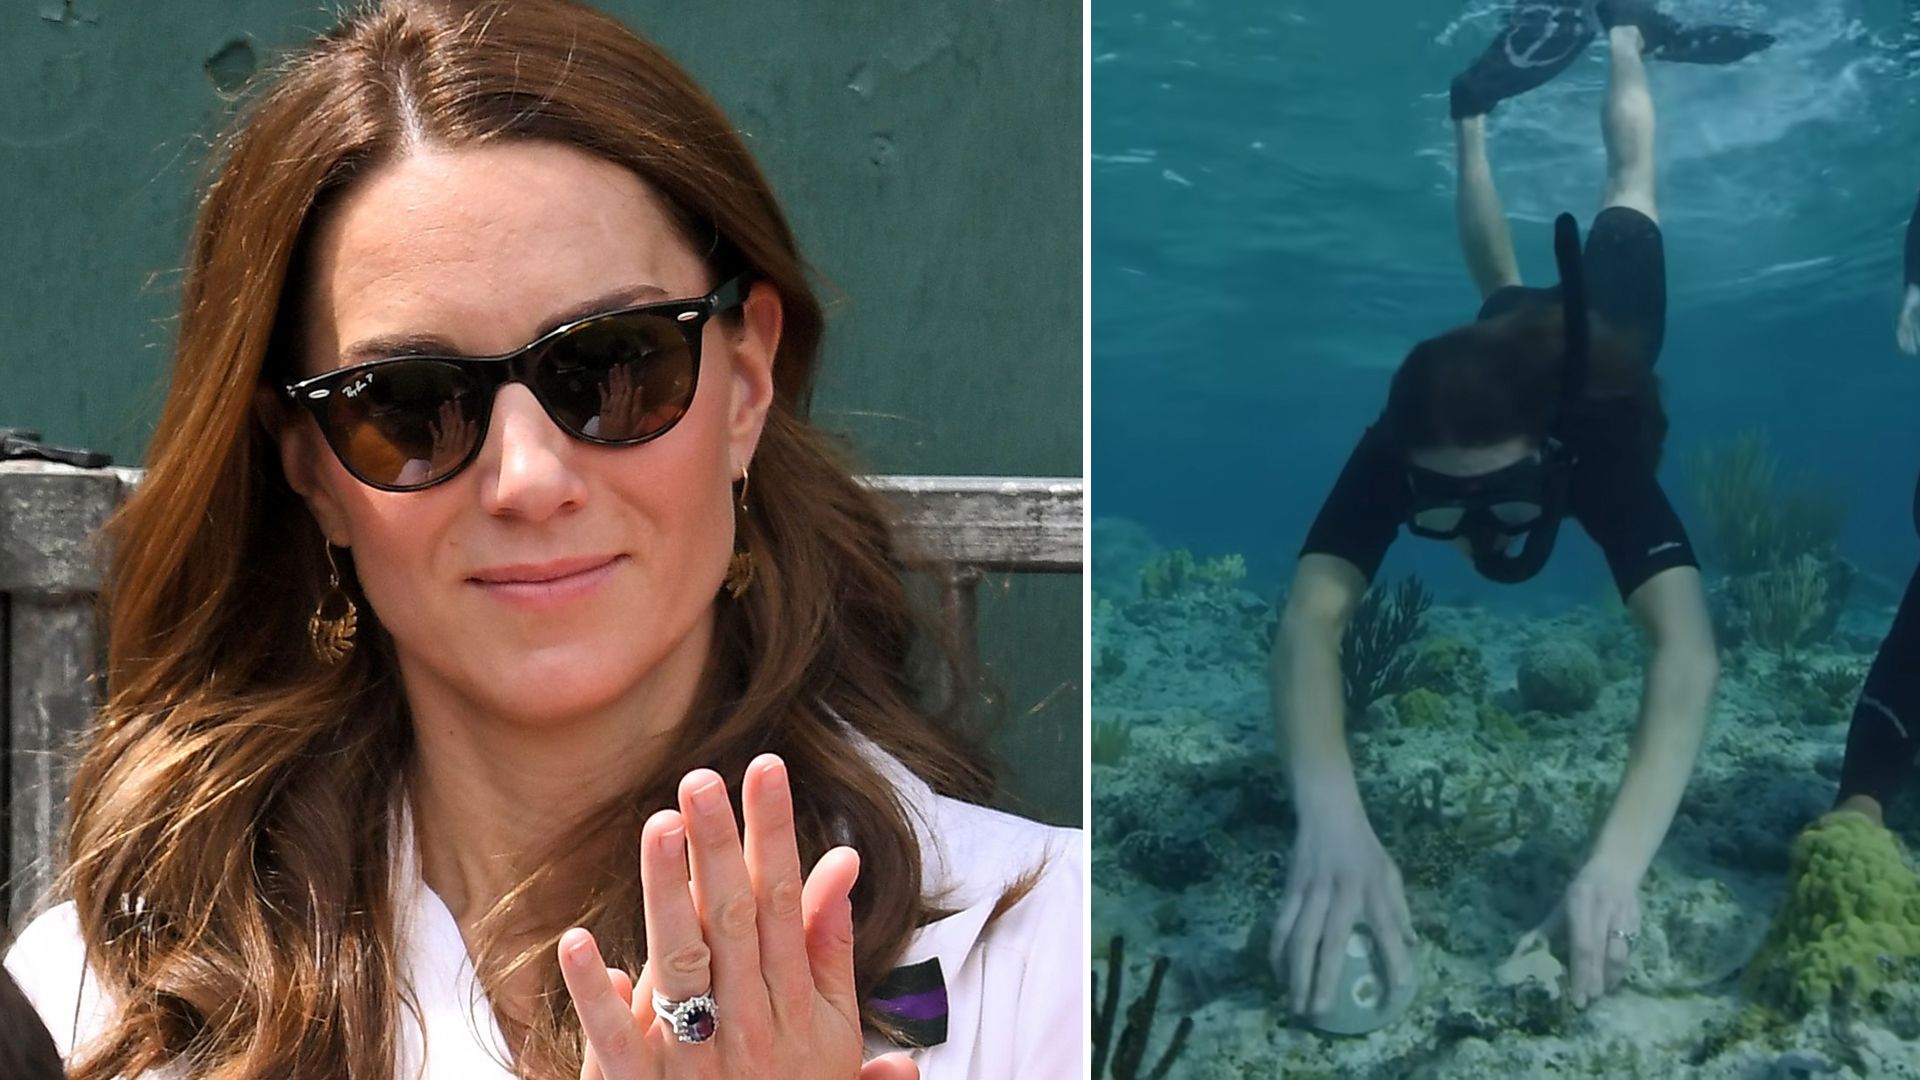 Kate Middleton clapping with sunglasses and diving underwater